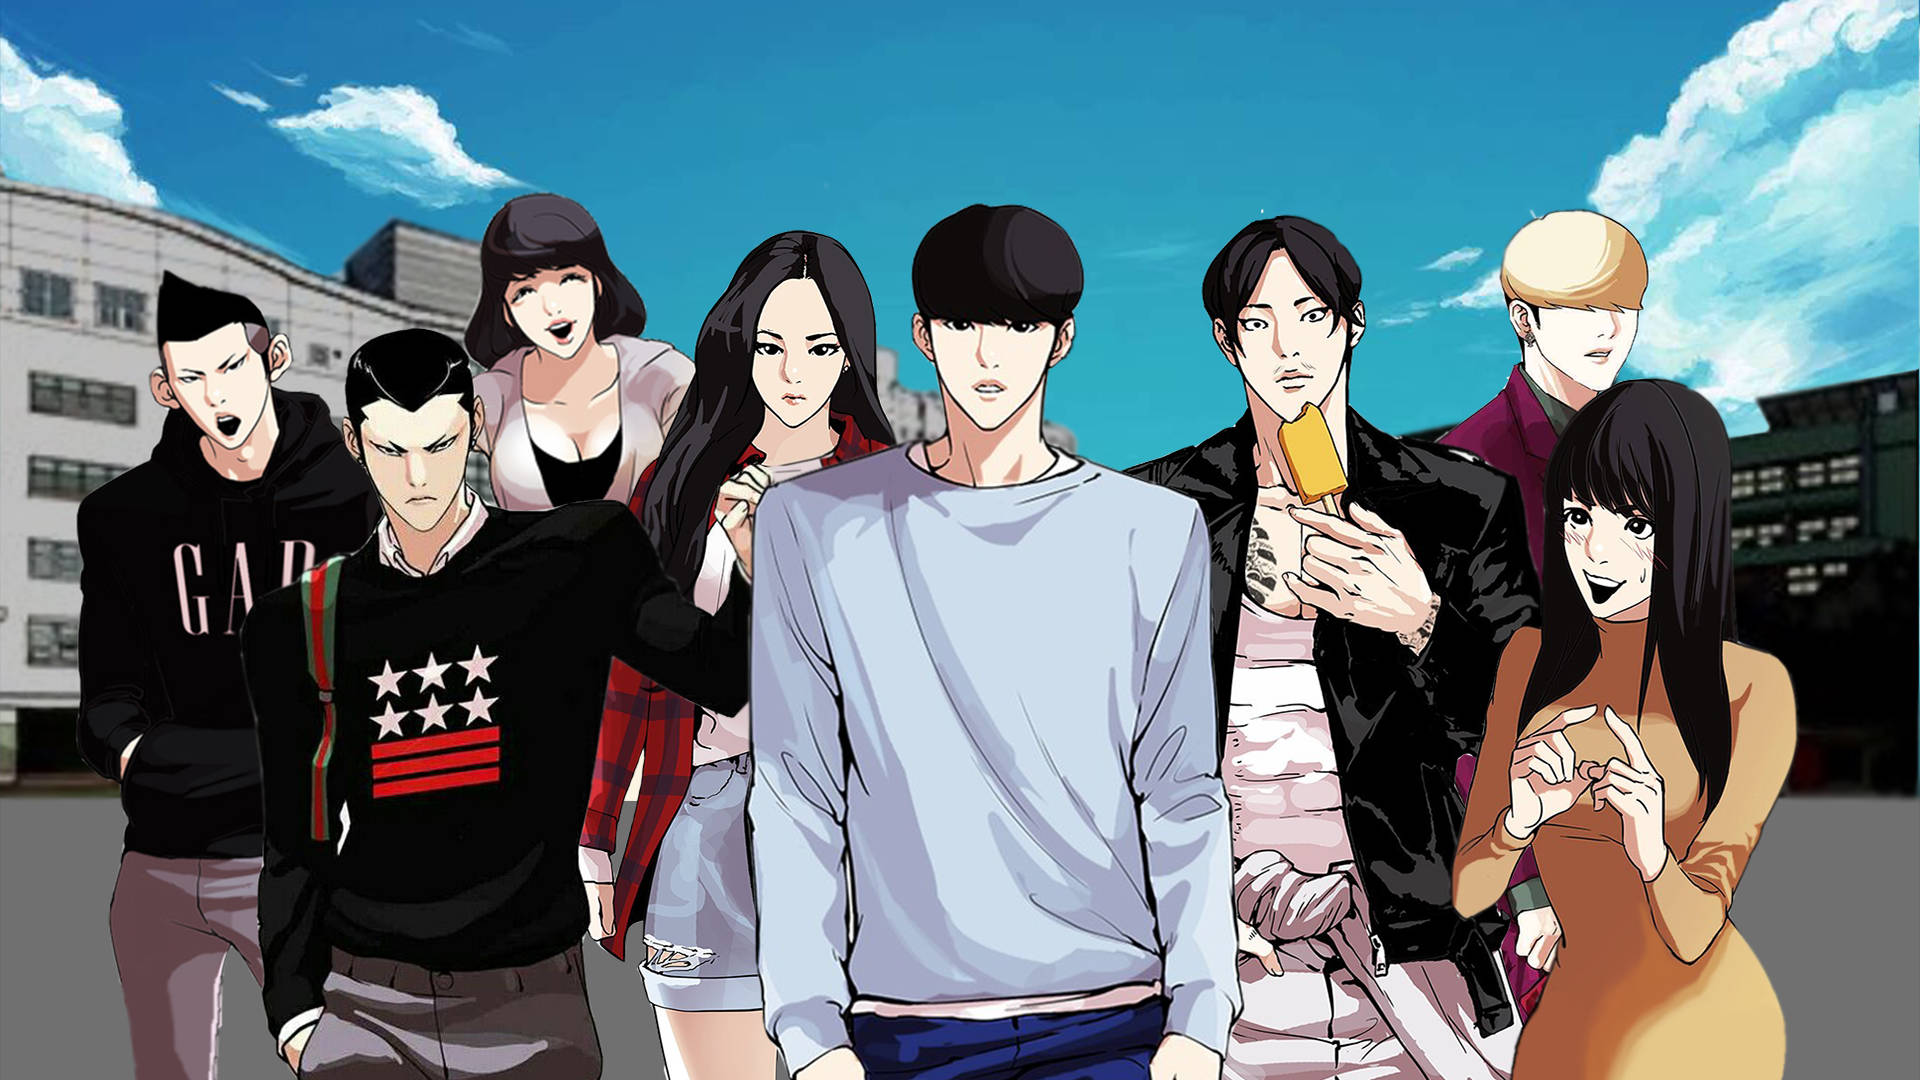 Top 999+ Lookism Wallpaper Full HD, 4K✅Free to Use